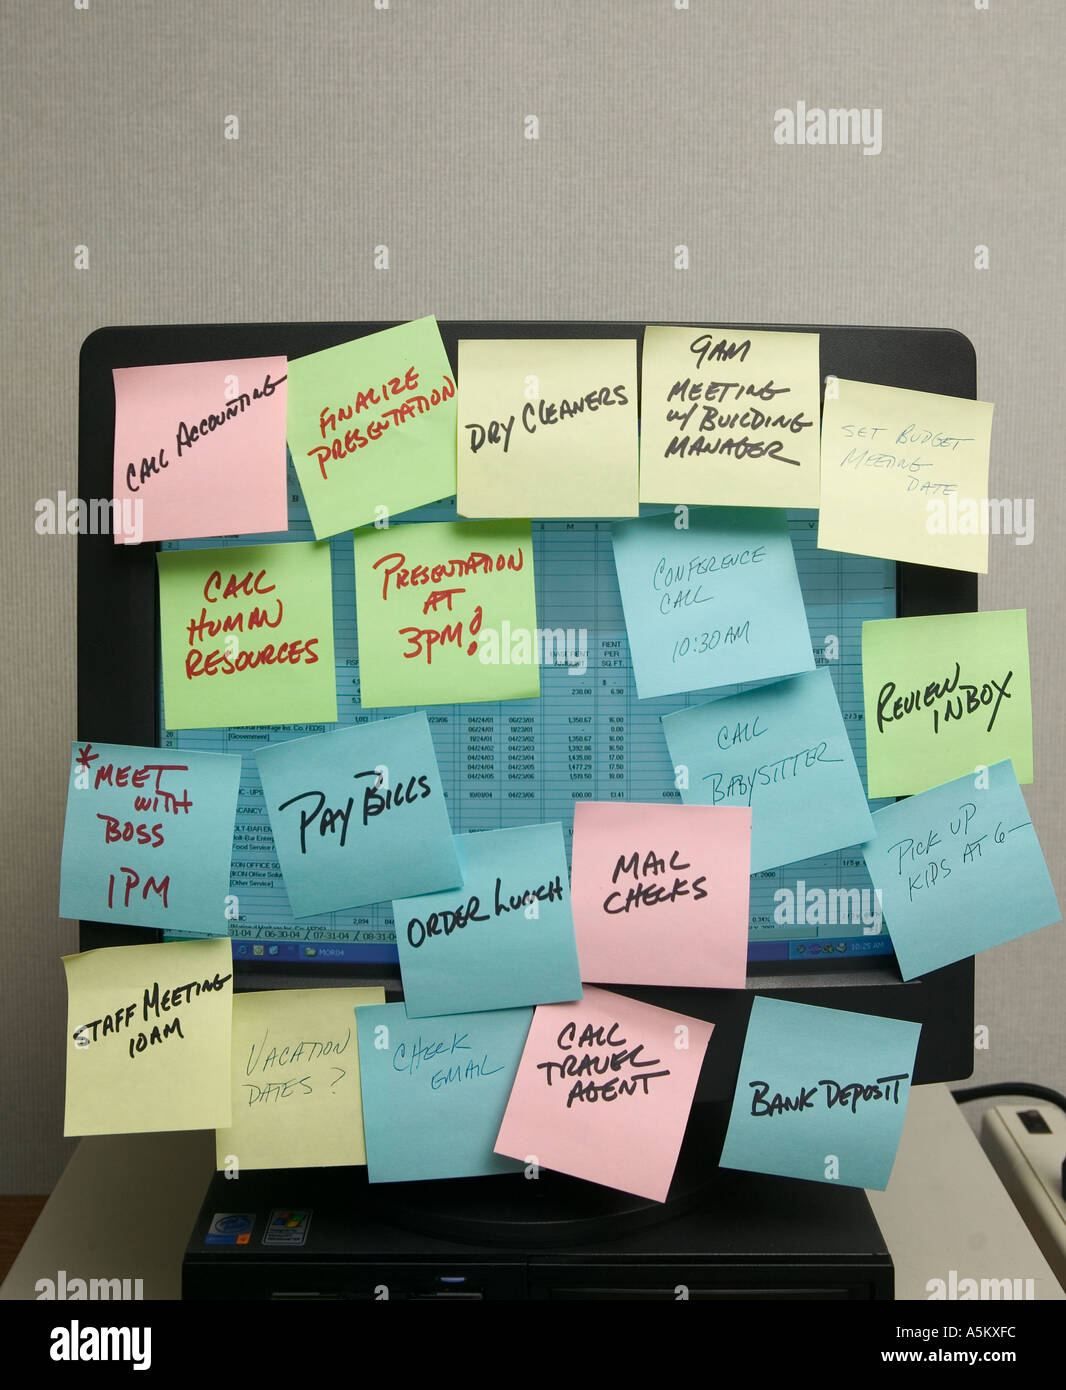 sticky notes on office computer screen Stock Photo - Alamy